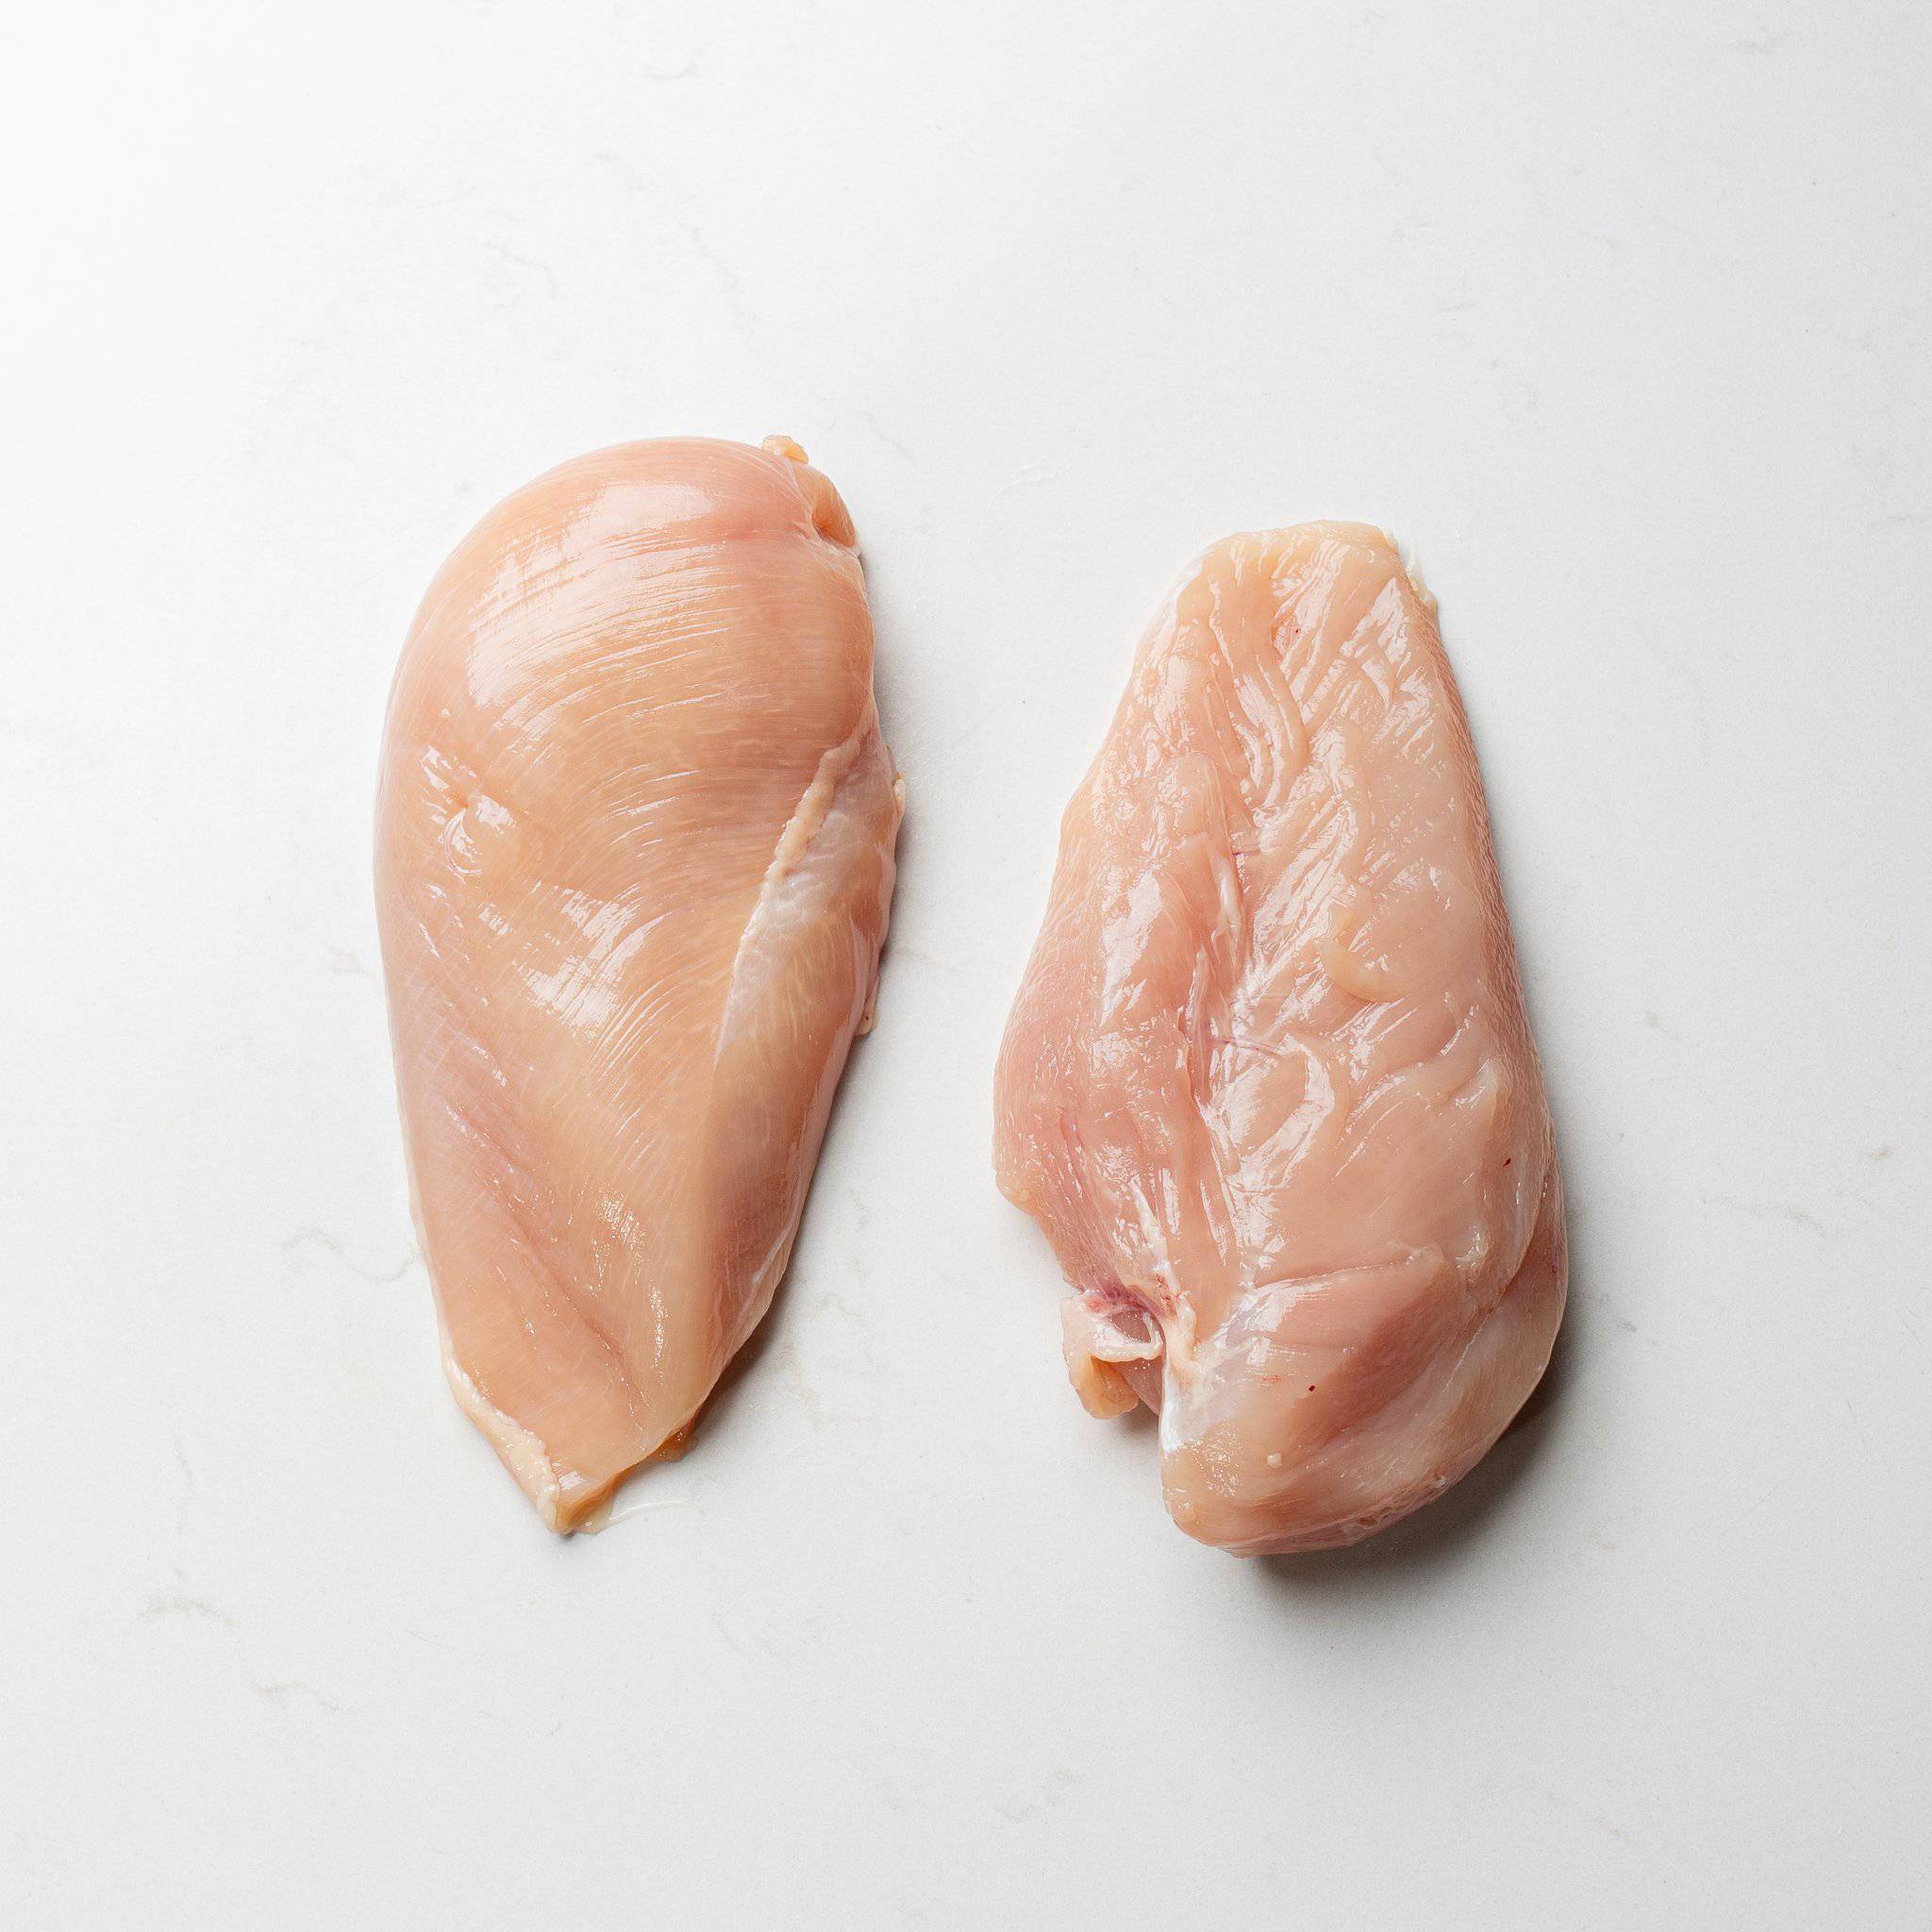 Boneless Skinless Chicken Breasts (Delivered) - The Butcher Shoppe